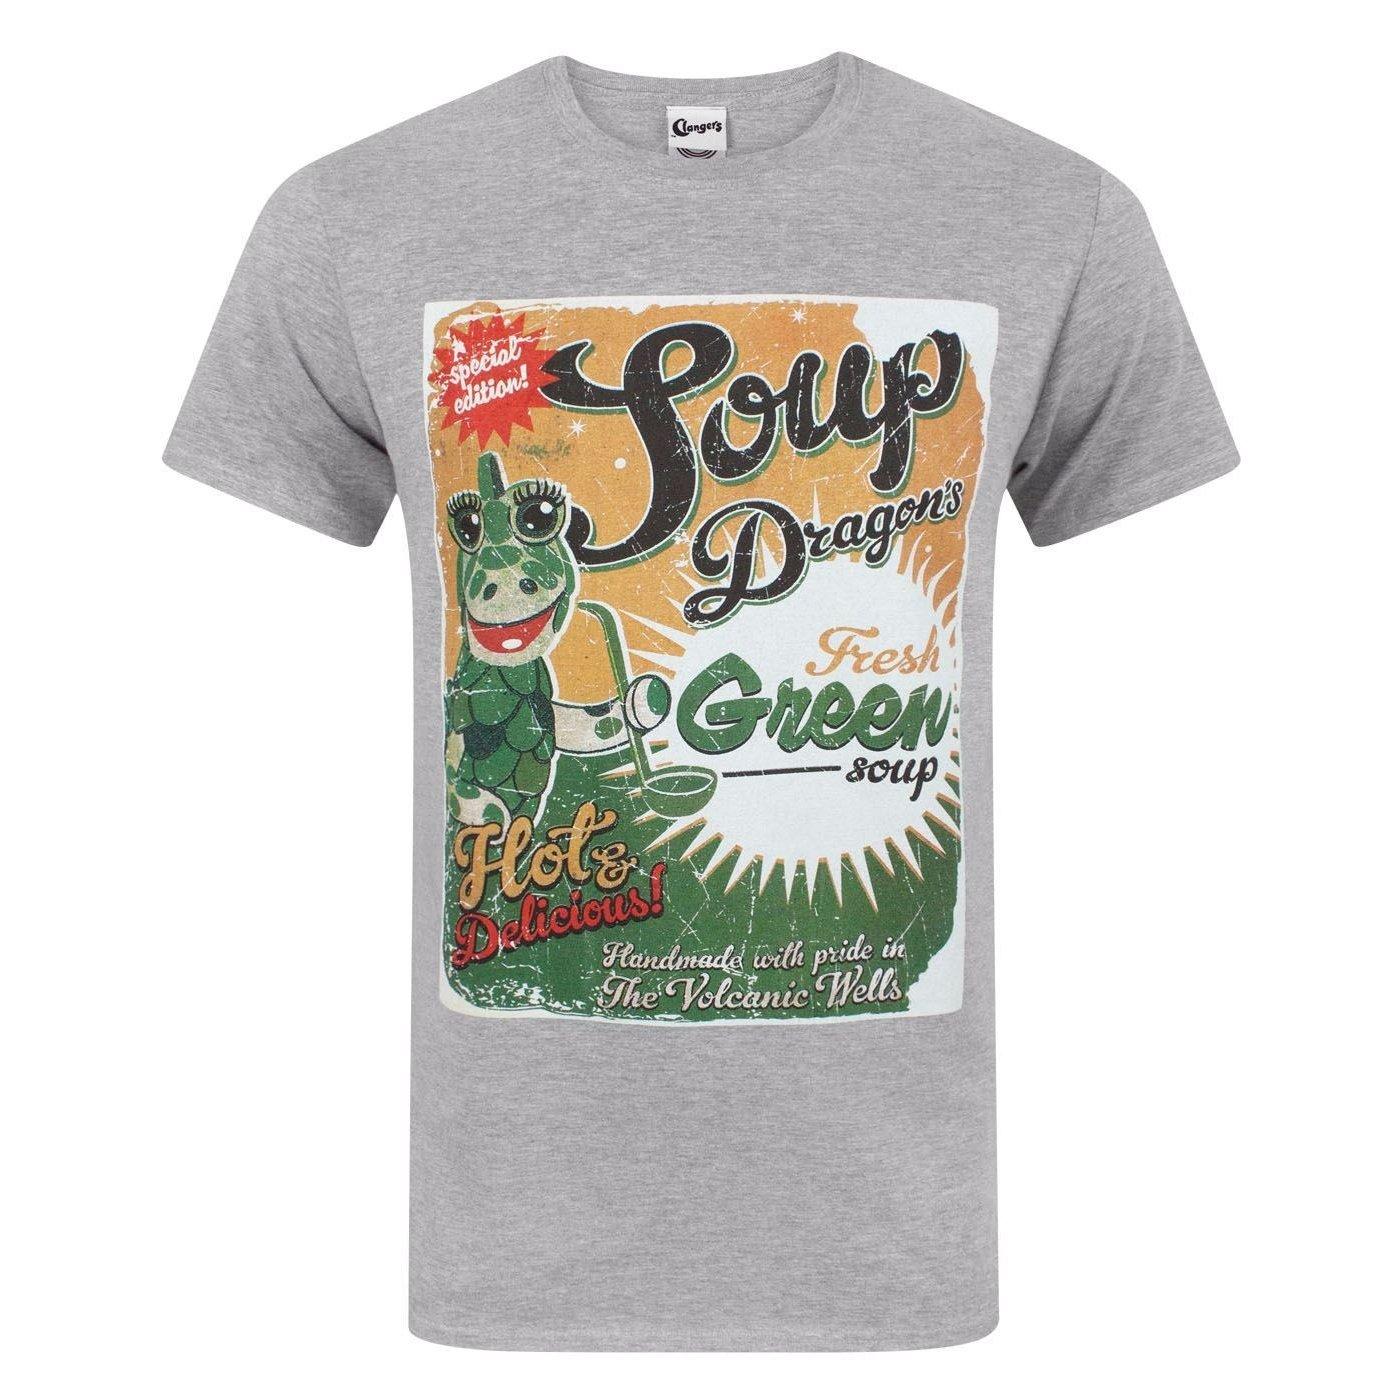 Image of Clangers 'Soup Dragon's Fresh Green Soup' T-Shirt - S